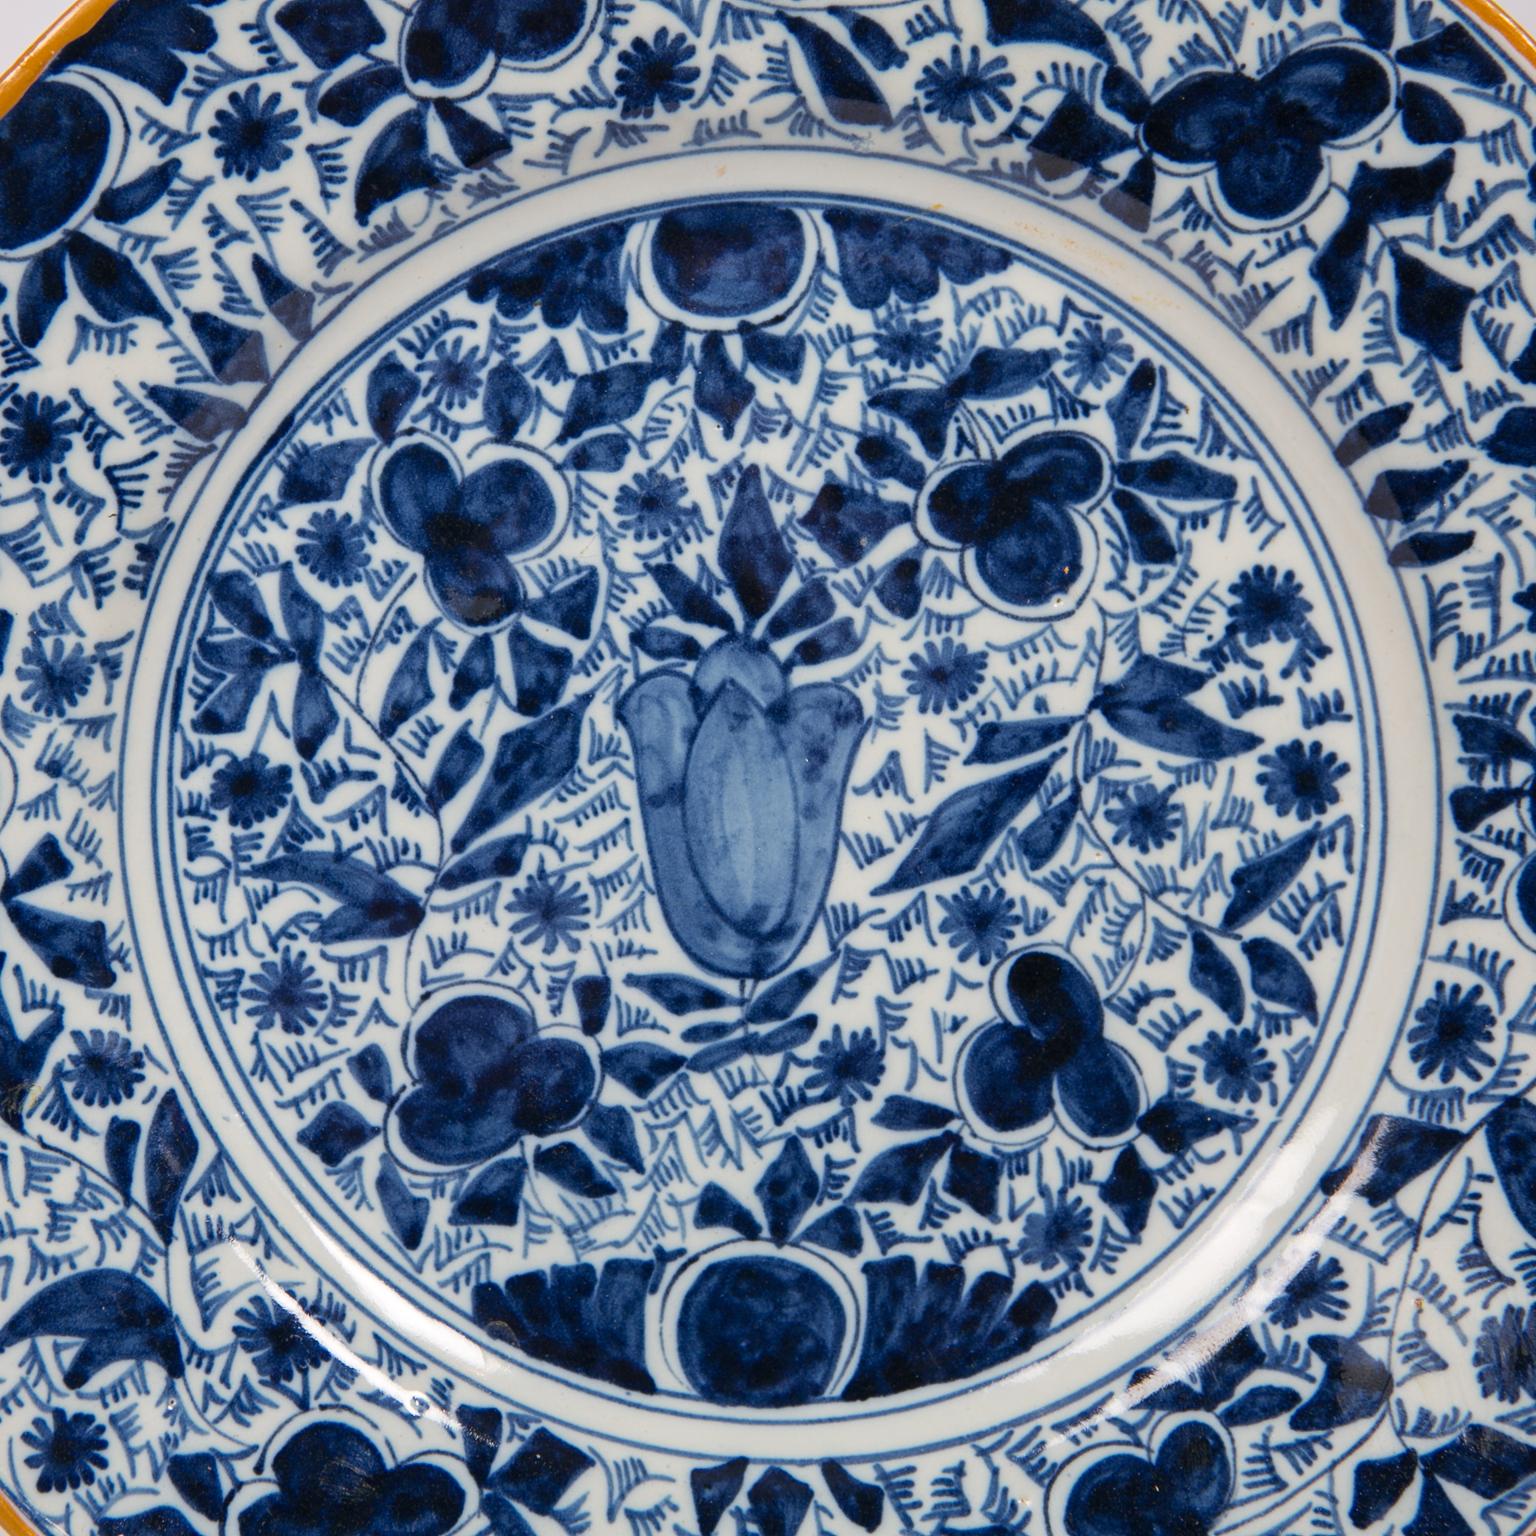 Pair of Antique Blue and White Delft Plates Made in the 18th Century 1